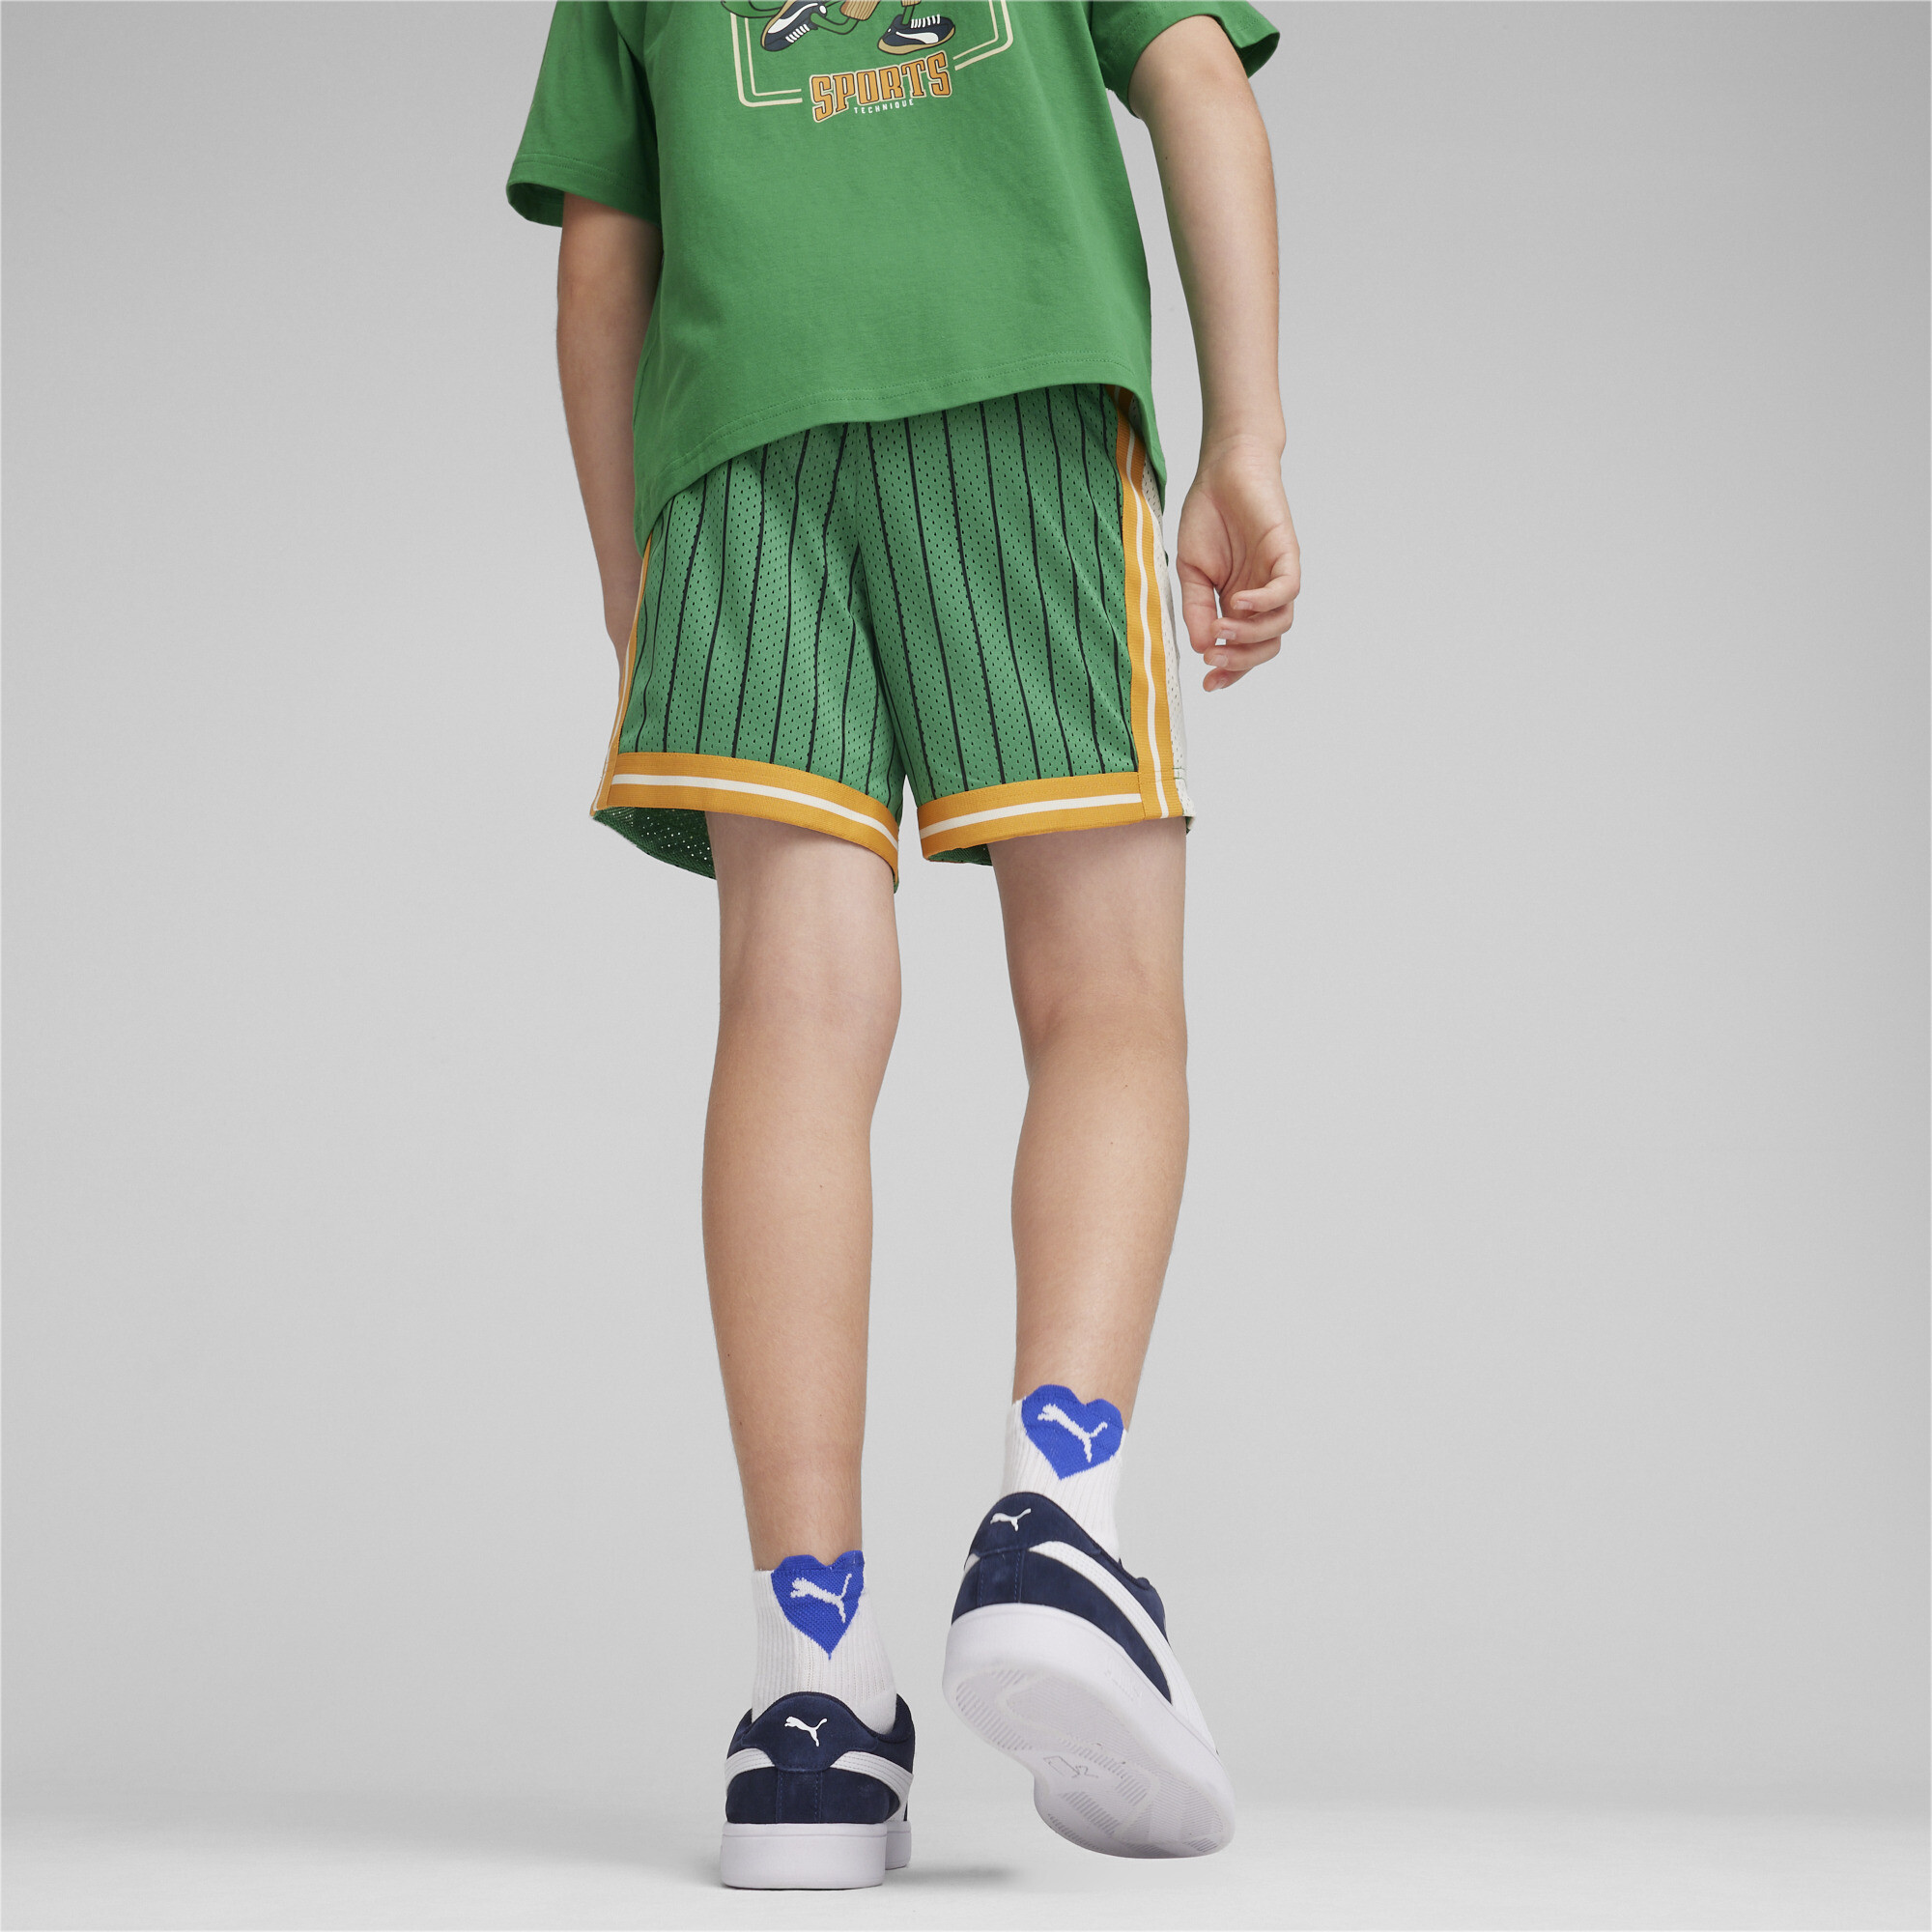 PUMA For The Fanbase Basketball Shorts In Green, Size 15-16 Youth